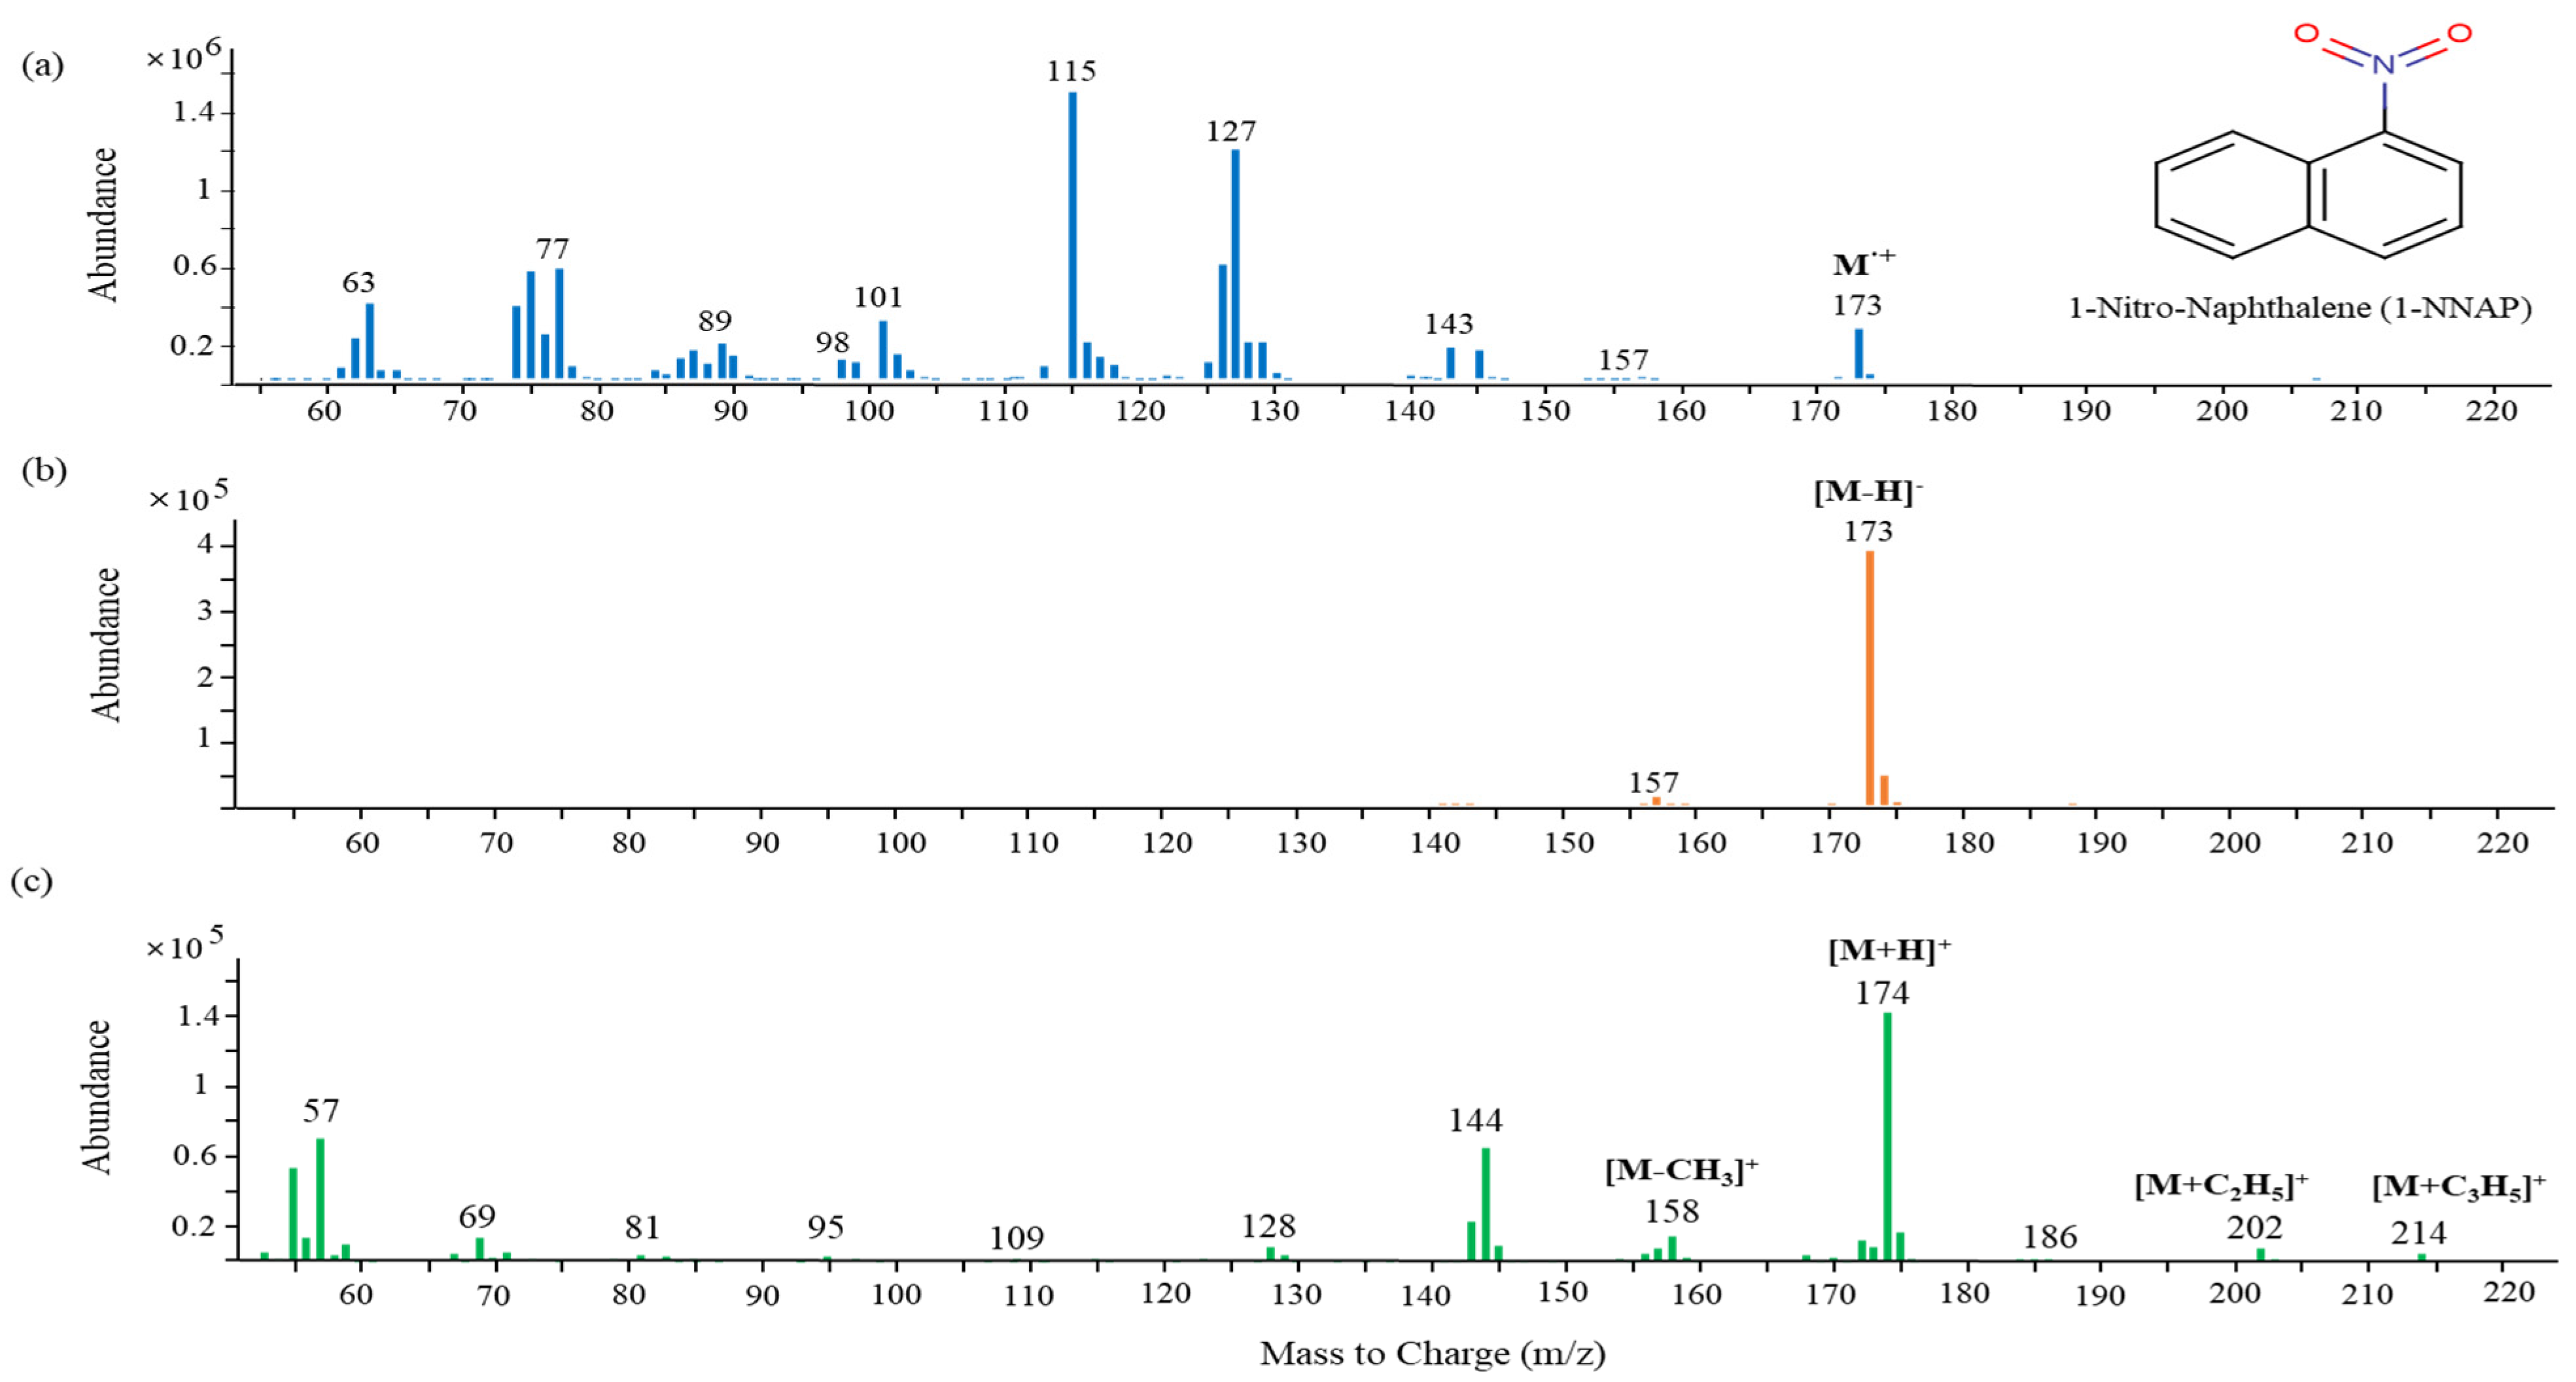 Molecules | Free Full-Text | Development of Quantitative Chemical  Ionization Using Gas Chromatography/Mass Spectrometry and Gas  Chromatography/Tandem Mass Spectrometry for Ambient Nitro- and Oxy-PAHs and  Its Applications